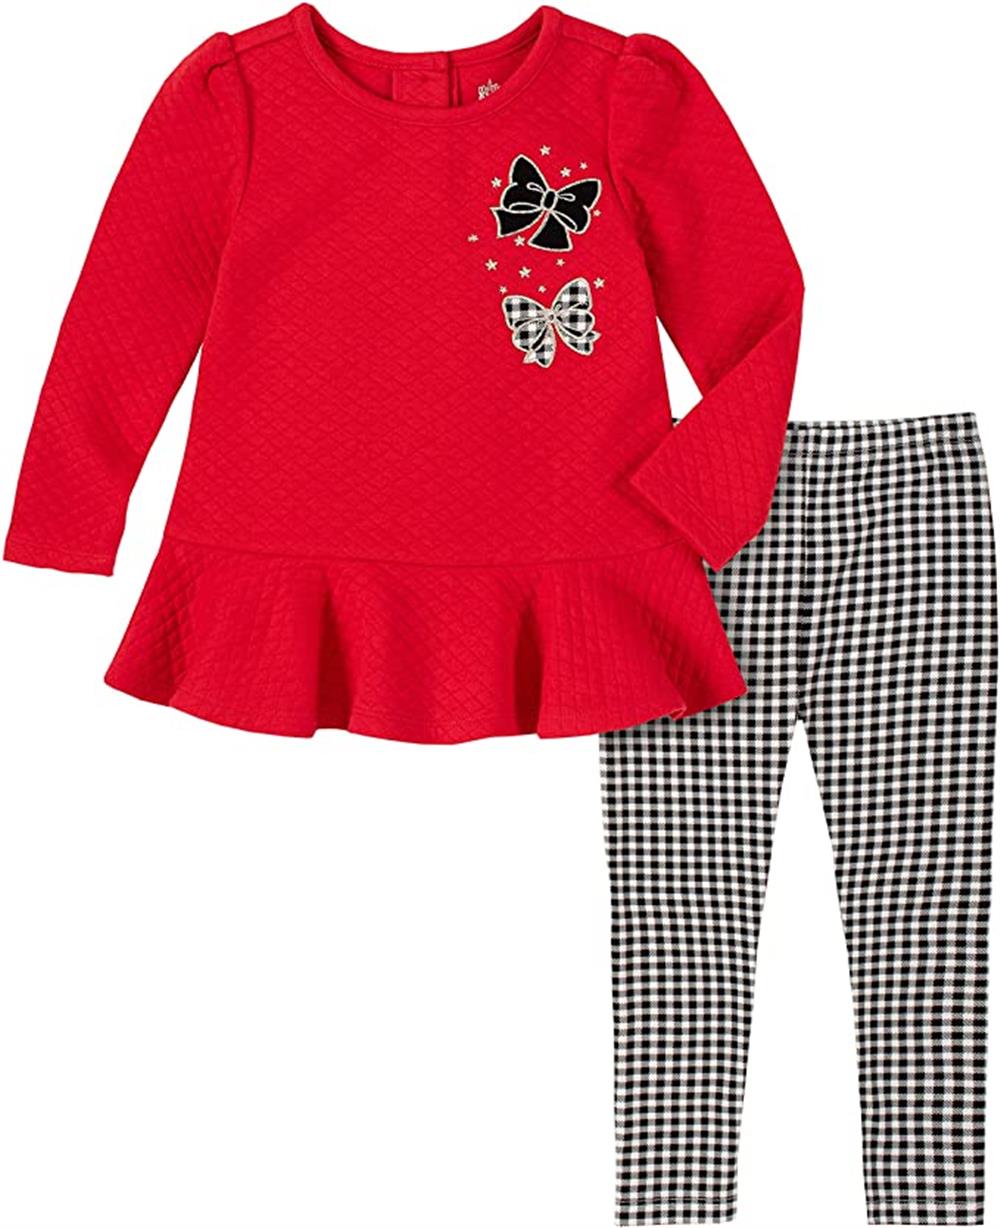 Kids Headquarters Girls Quilted Peplum Tunic and Check Plaid Legging Set